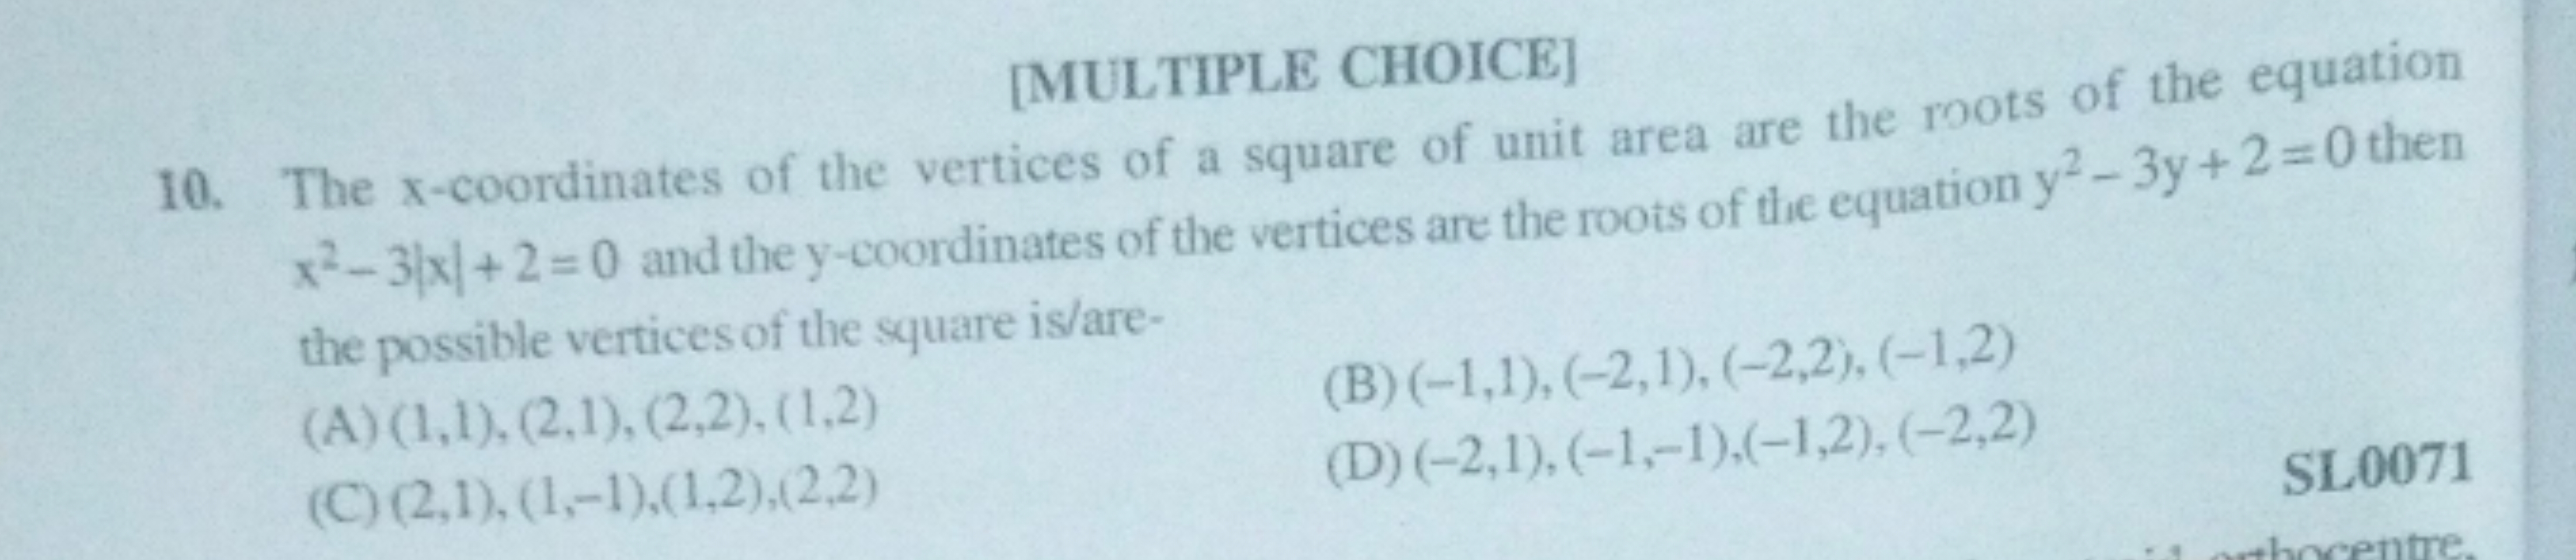 [MULTIPLE CHOICE] 10. The x-coordinates of the vertices of a square of